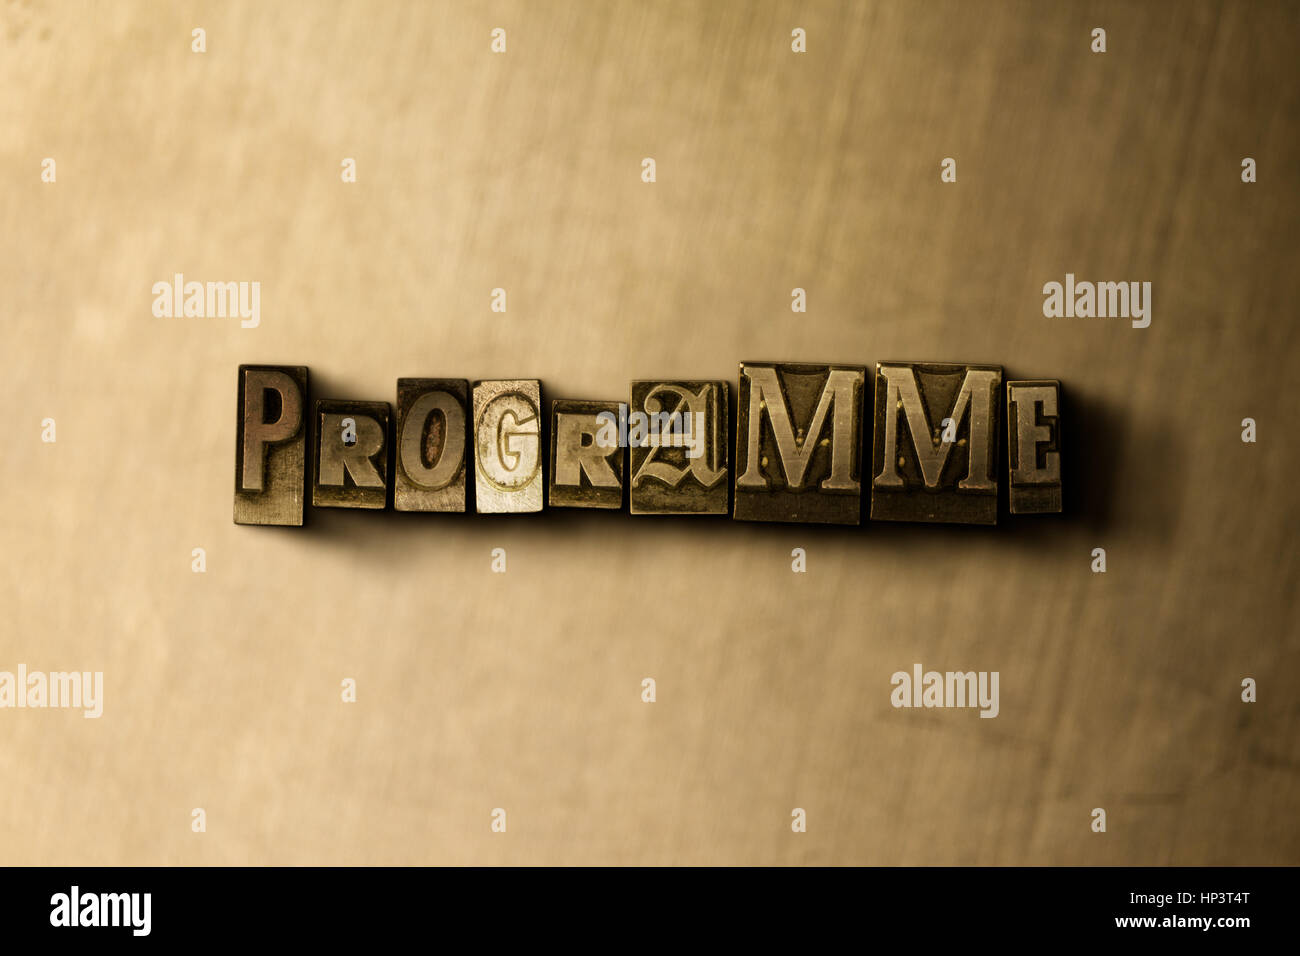 PROGRAMME - close-up of grungy vintage typeset word on metal backdrop. Royalty free stock illustration.  Can be used for online banner ads and direct  Stock Photo